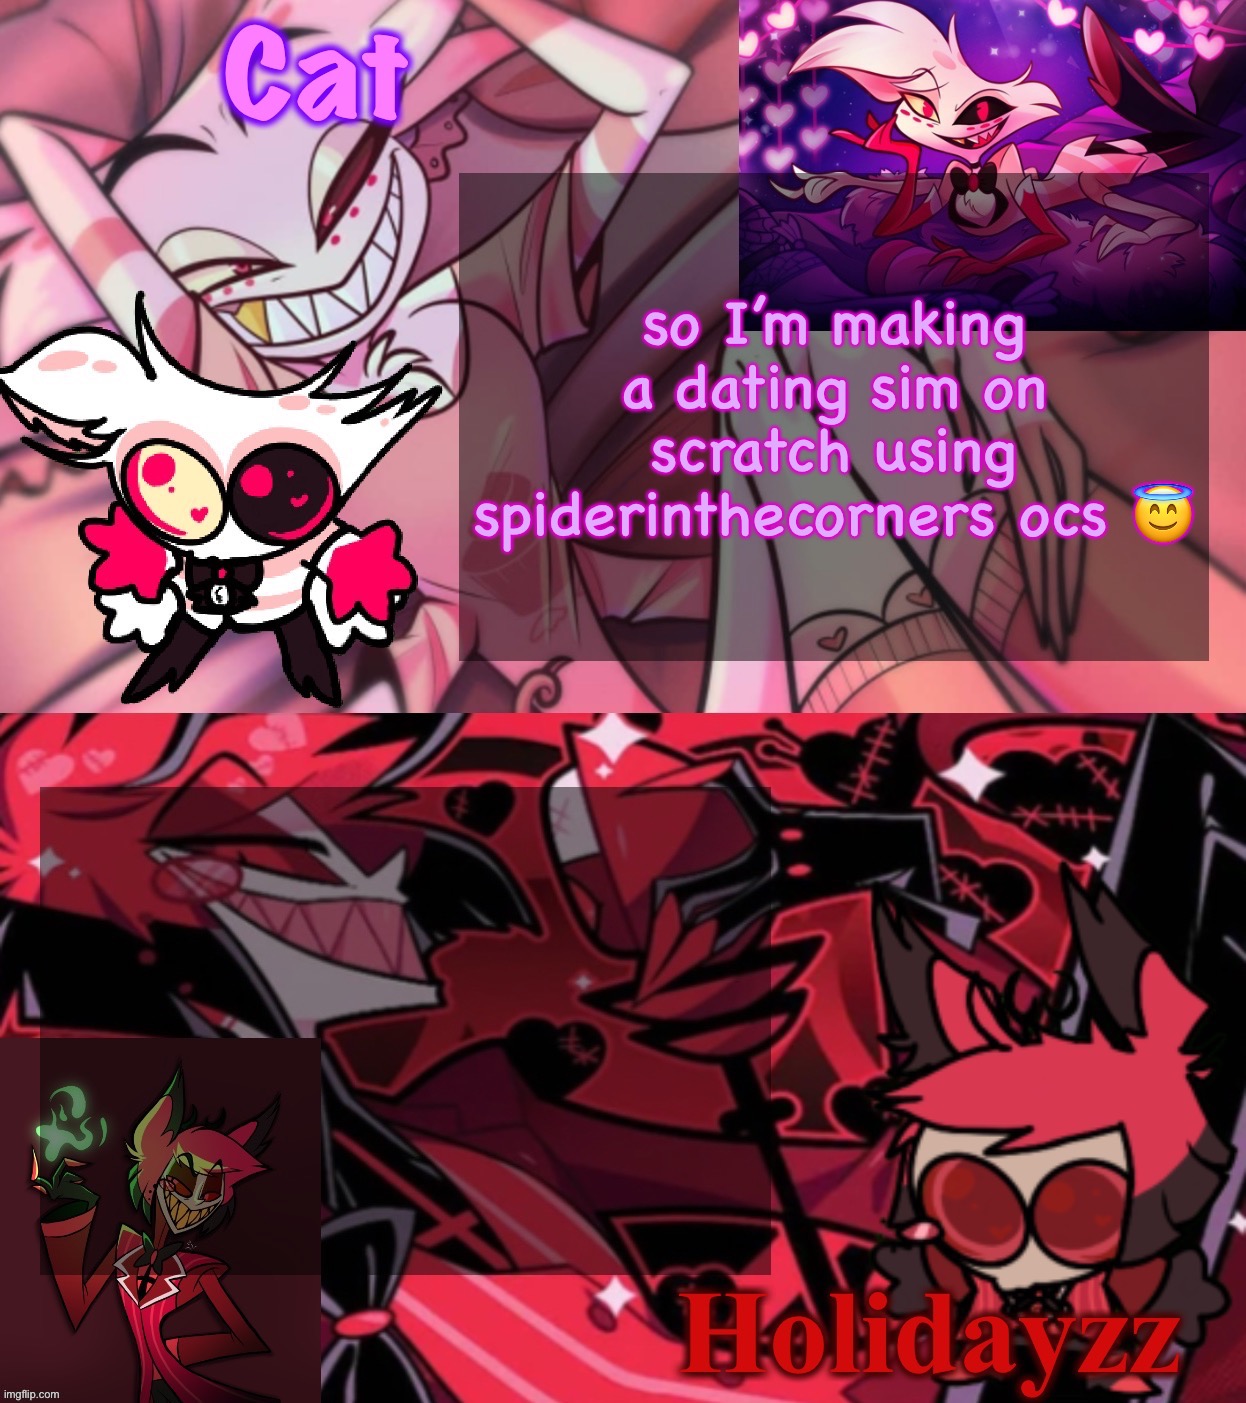 I am silly | so I’m making a dating sim on scratch using spiderinthecorners ocs 😇 | image tagged in cat and holidayzz template v2 | made w/ Imgflip meme maker